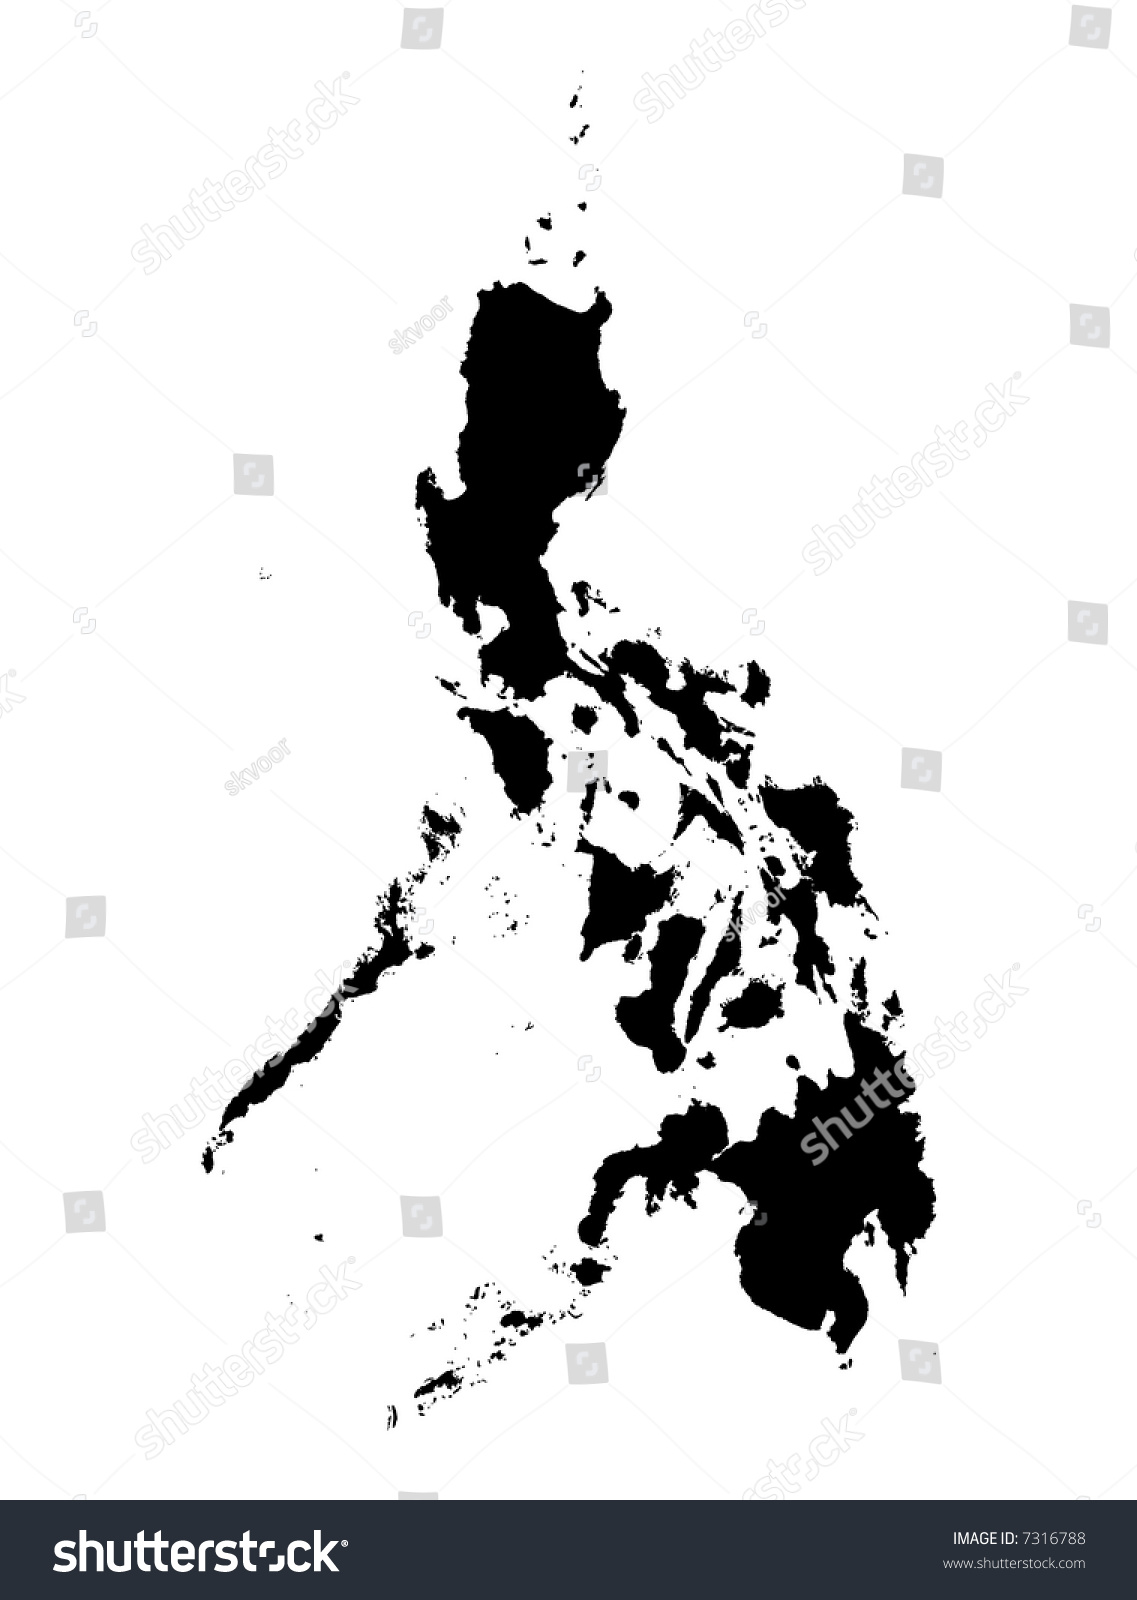 philippine map clipart black and white - photo #6